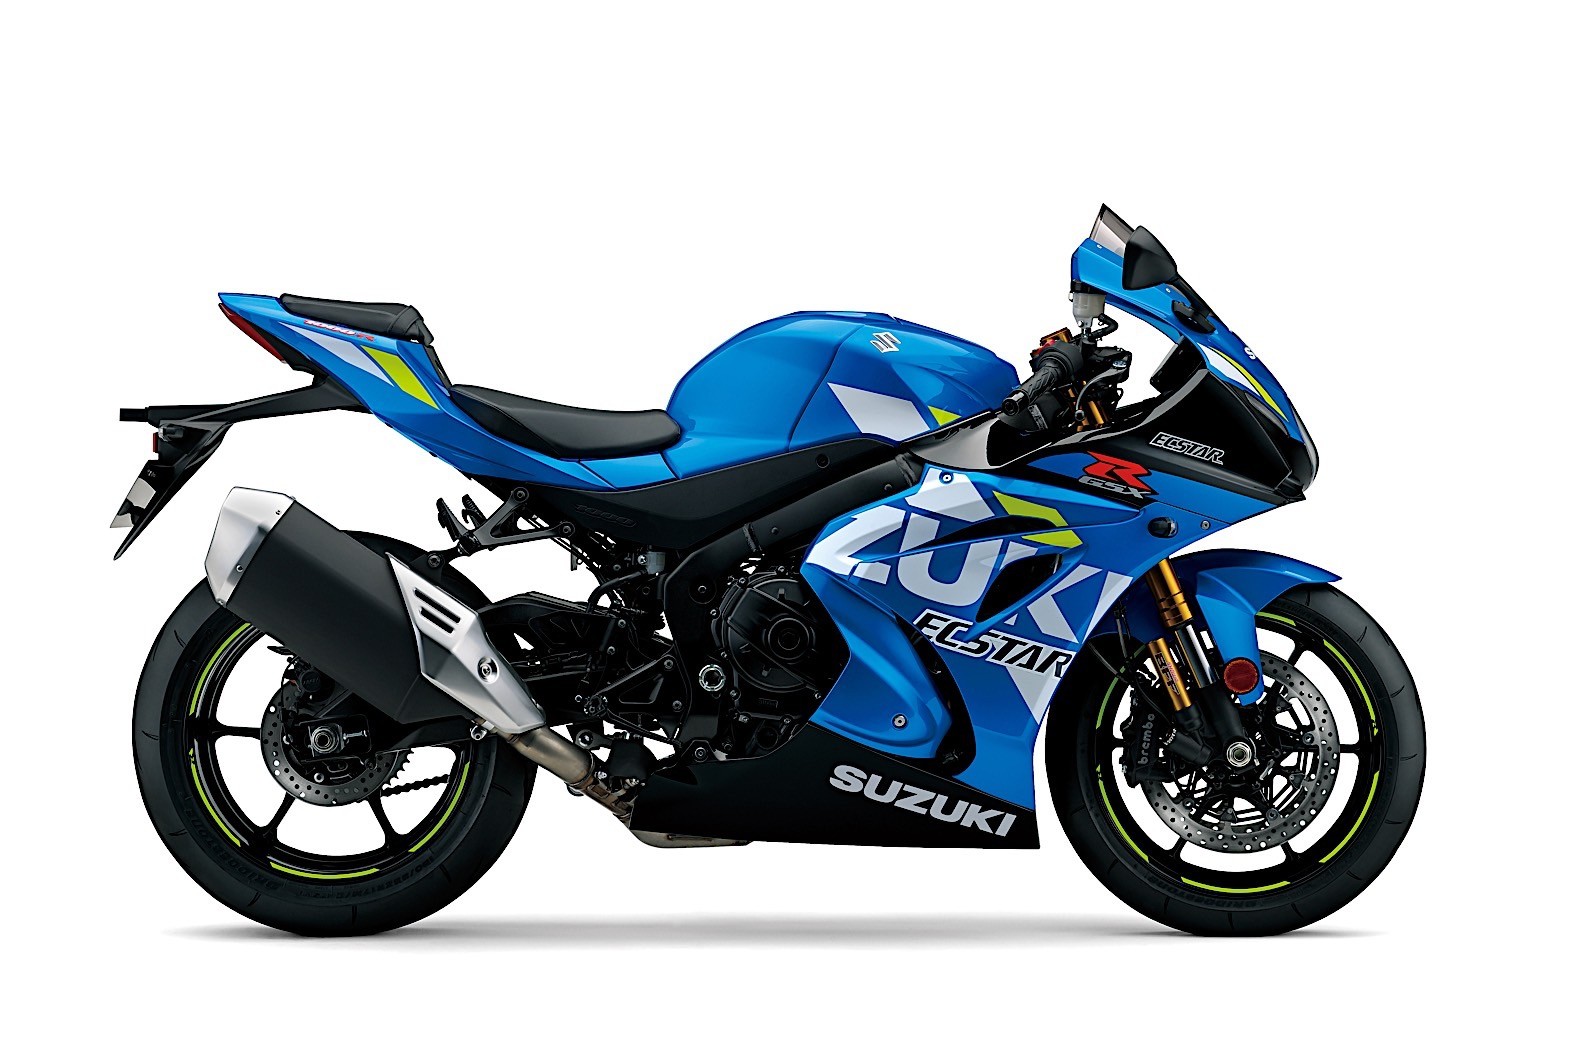 2019 Suzuki Motorcycles Shine in New Colors at the Motorcycle Live ...